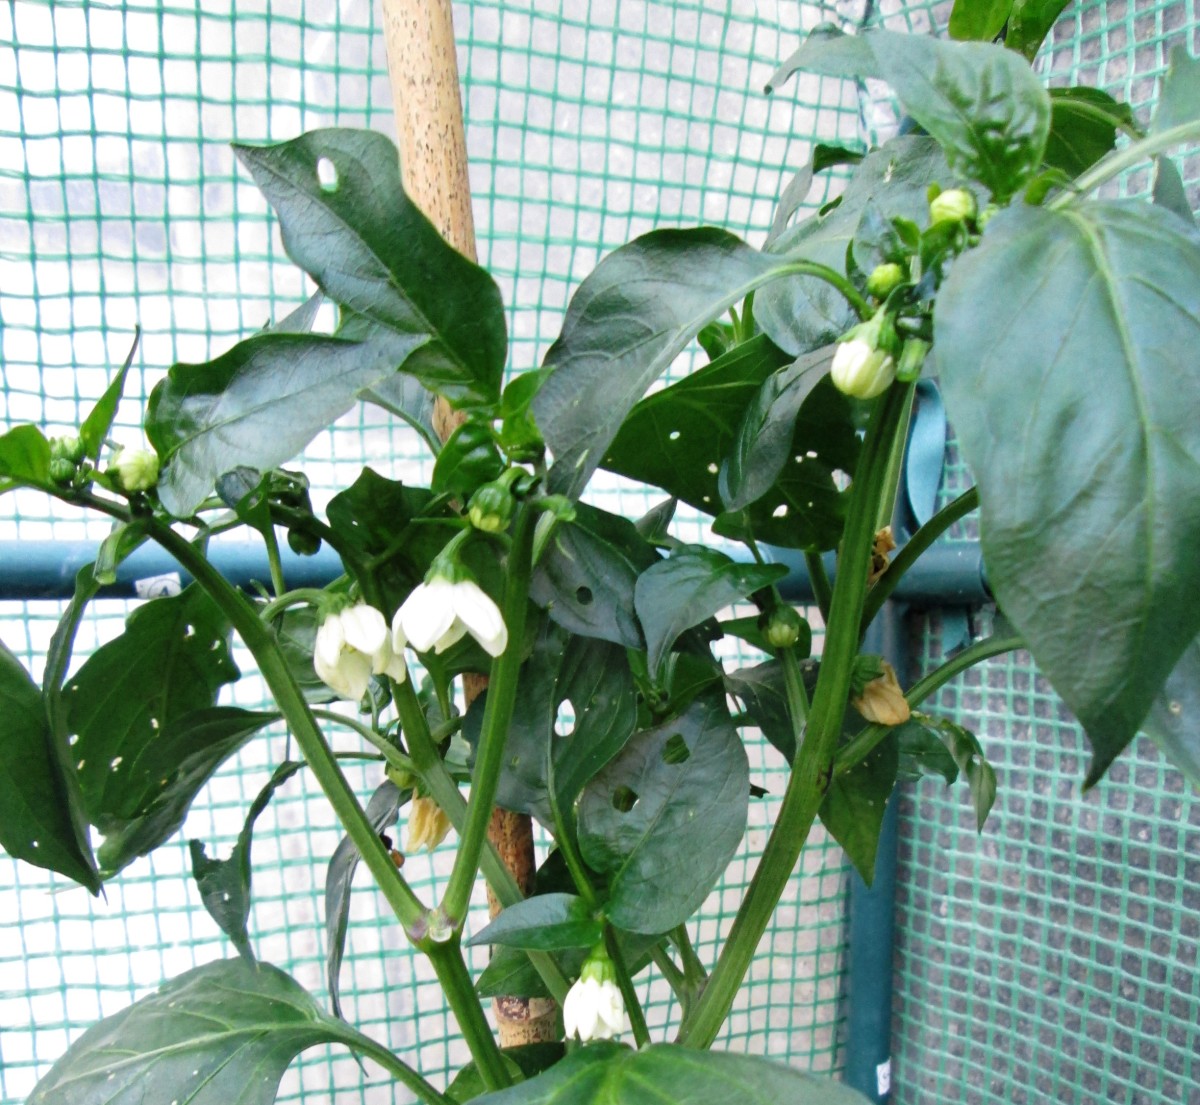 Flowers on a Pepper plant.